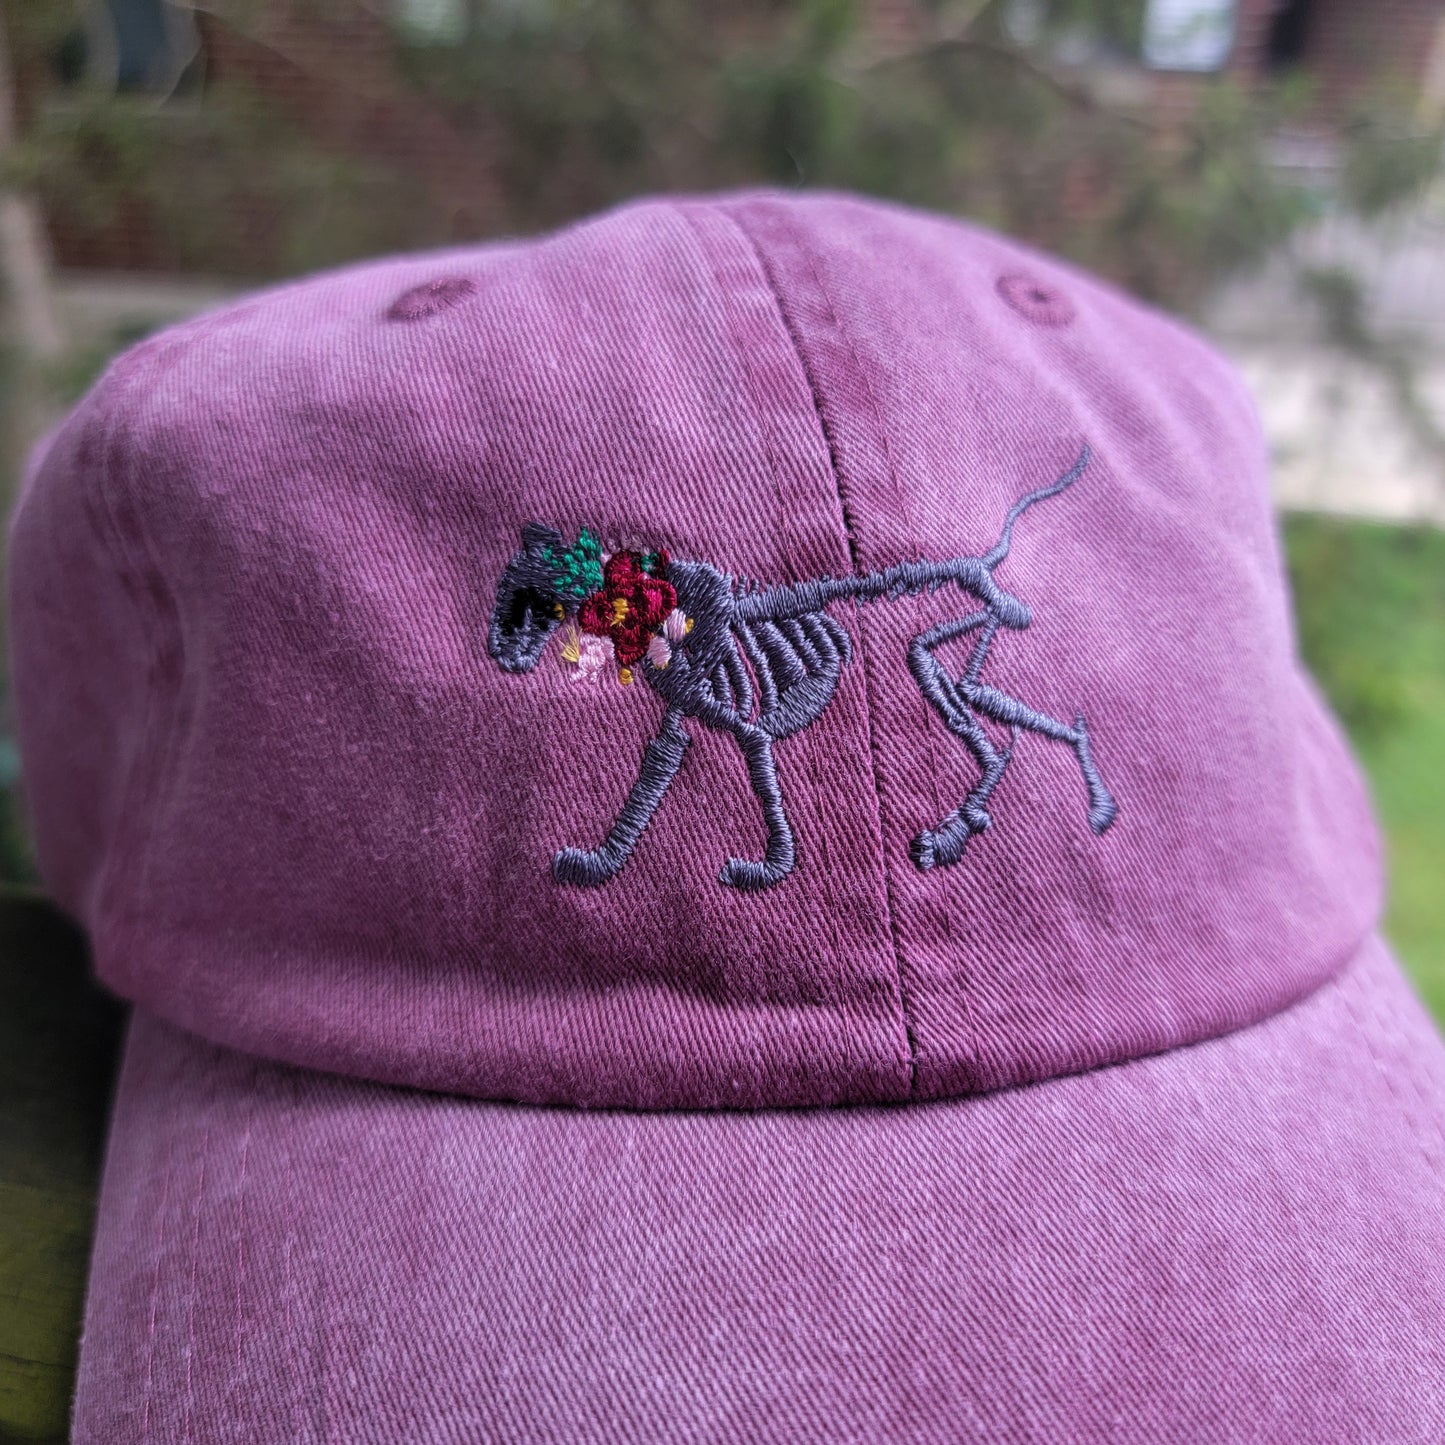 Skelly Cat - Embroidered Pigment-Dyed Cap